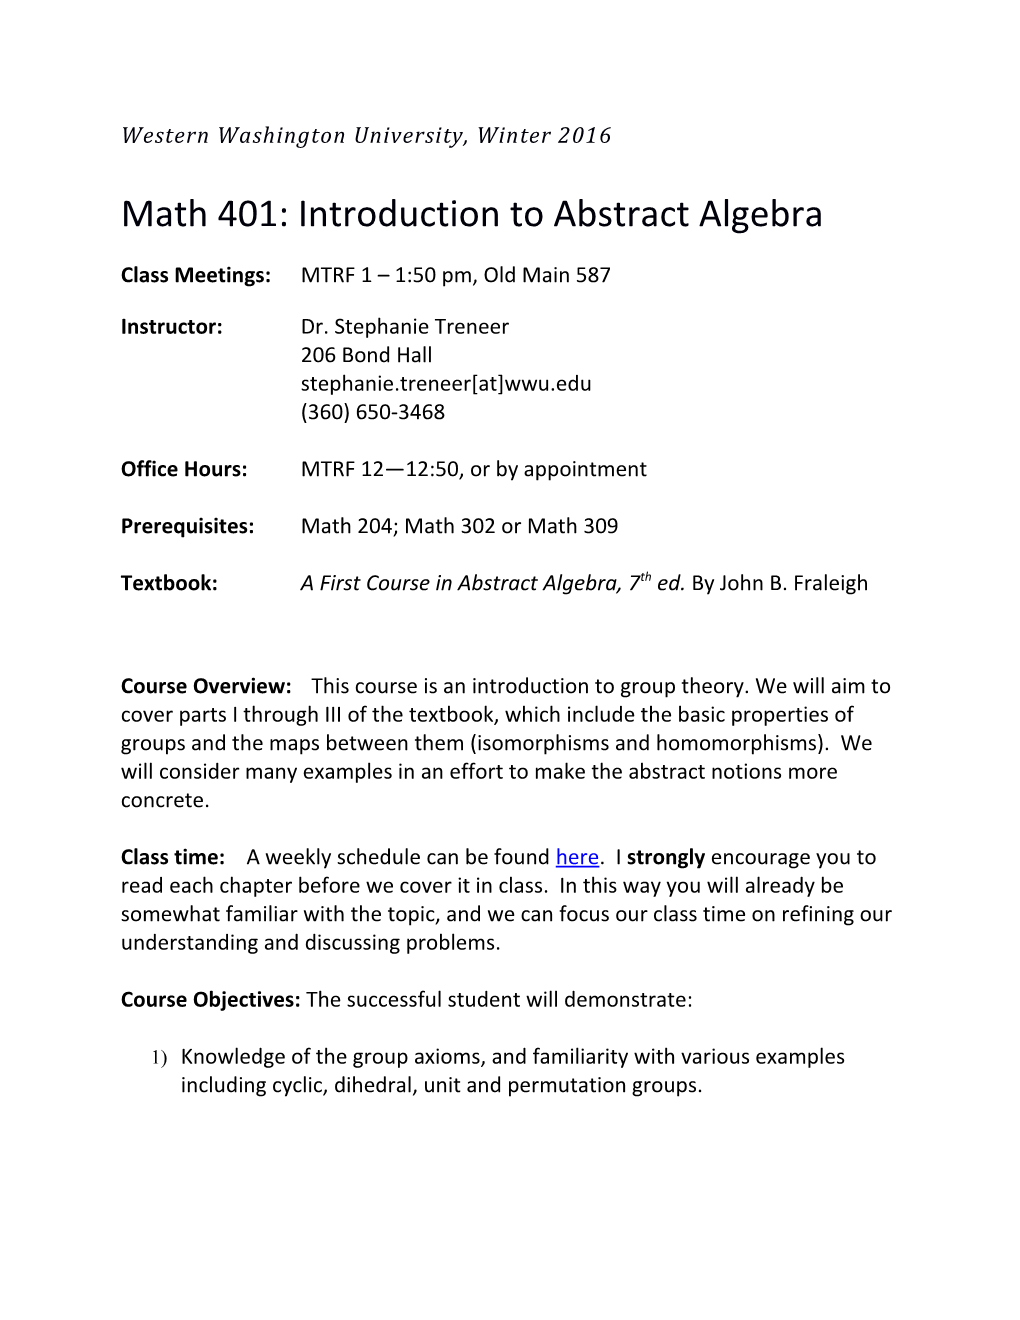 Math 401: Introduction to Abstract Algebra